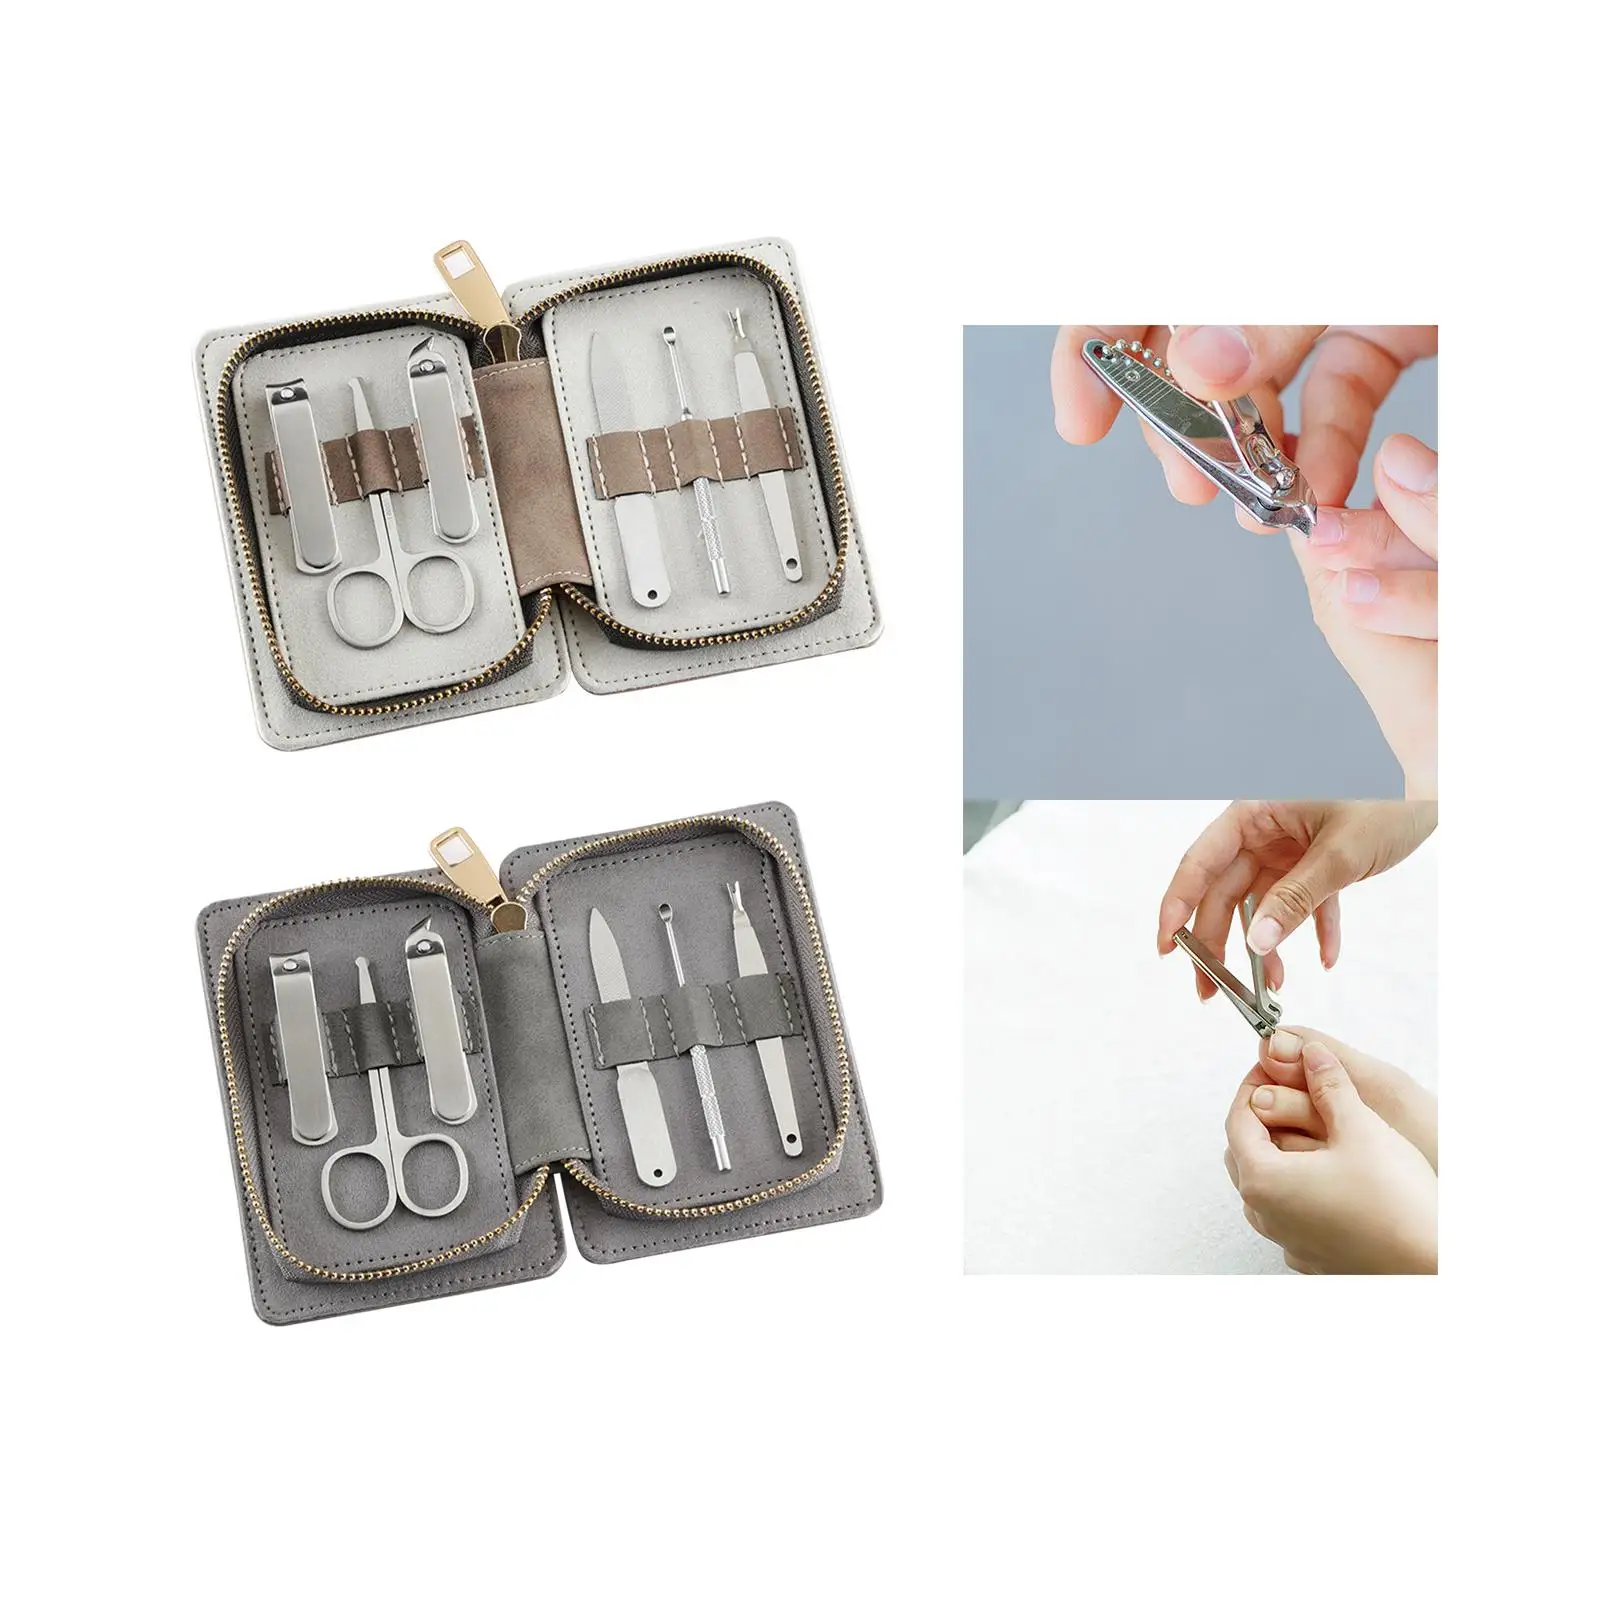 6 Pieces Manicure Set with PU Leather Case Hand Foot Nail Care Tools Stainless Steel 6 in 1 Nail Clippers Pedicure Kit for Home